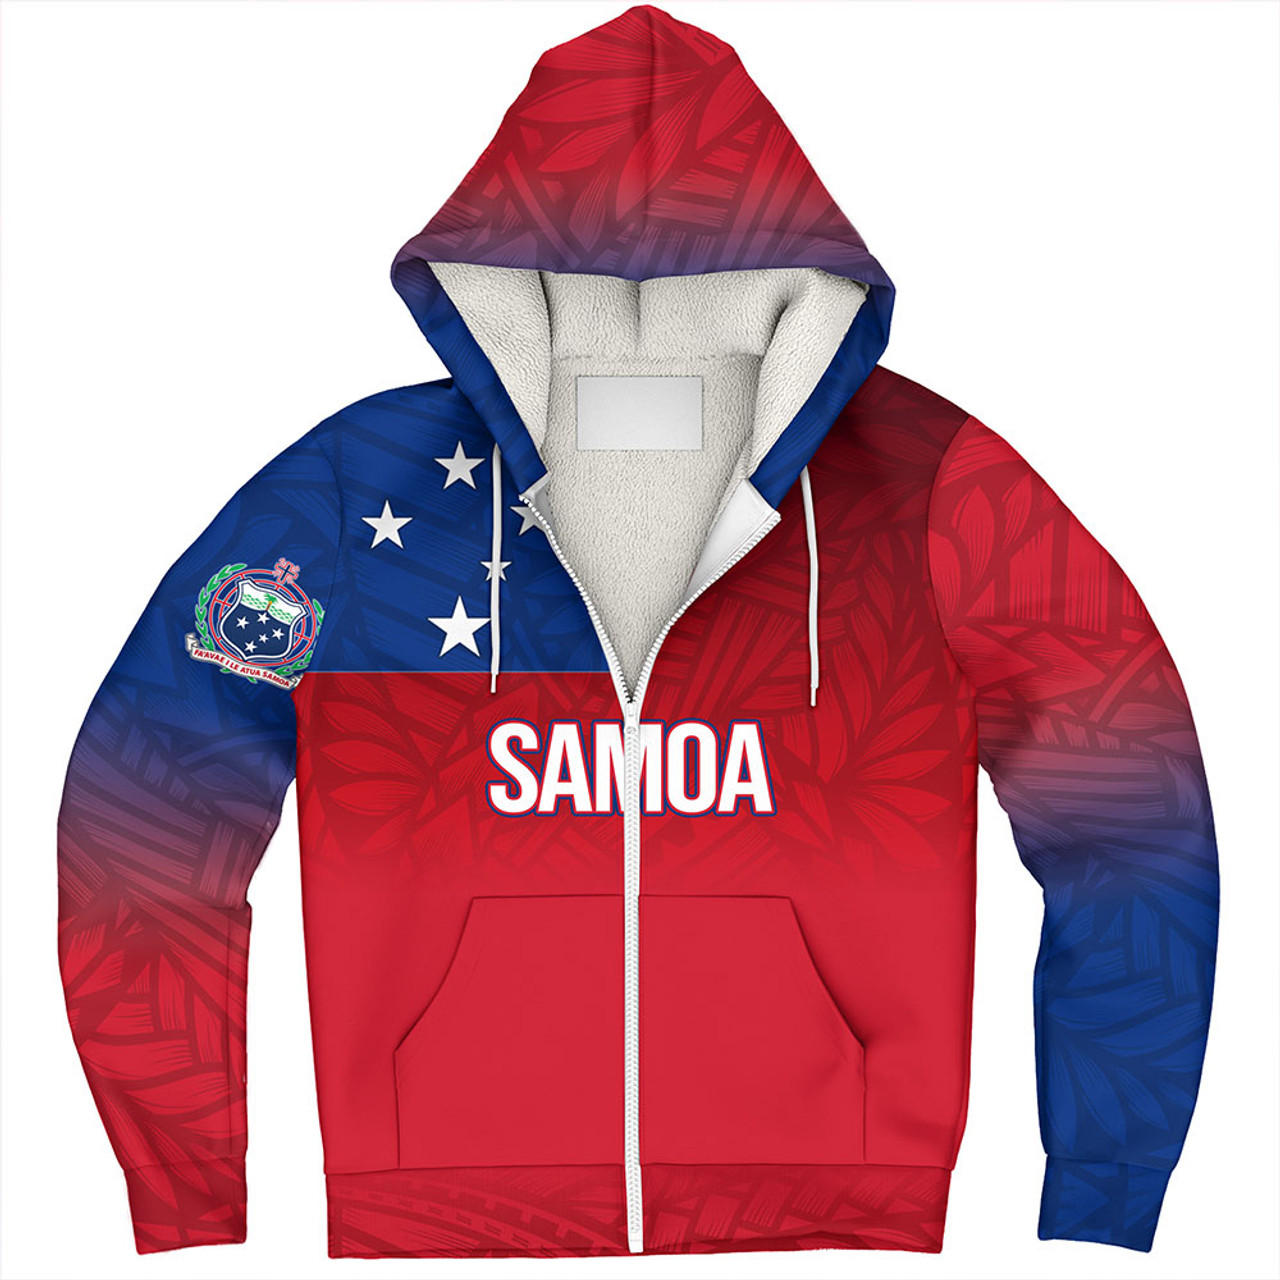 Samoa Sherpa Hoodie - Samoa Flag Color With Traditional Patterns